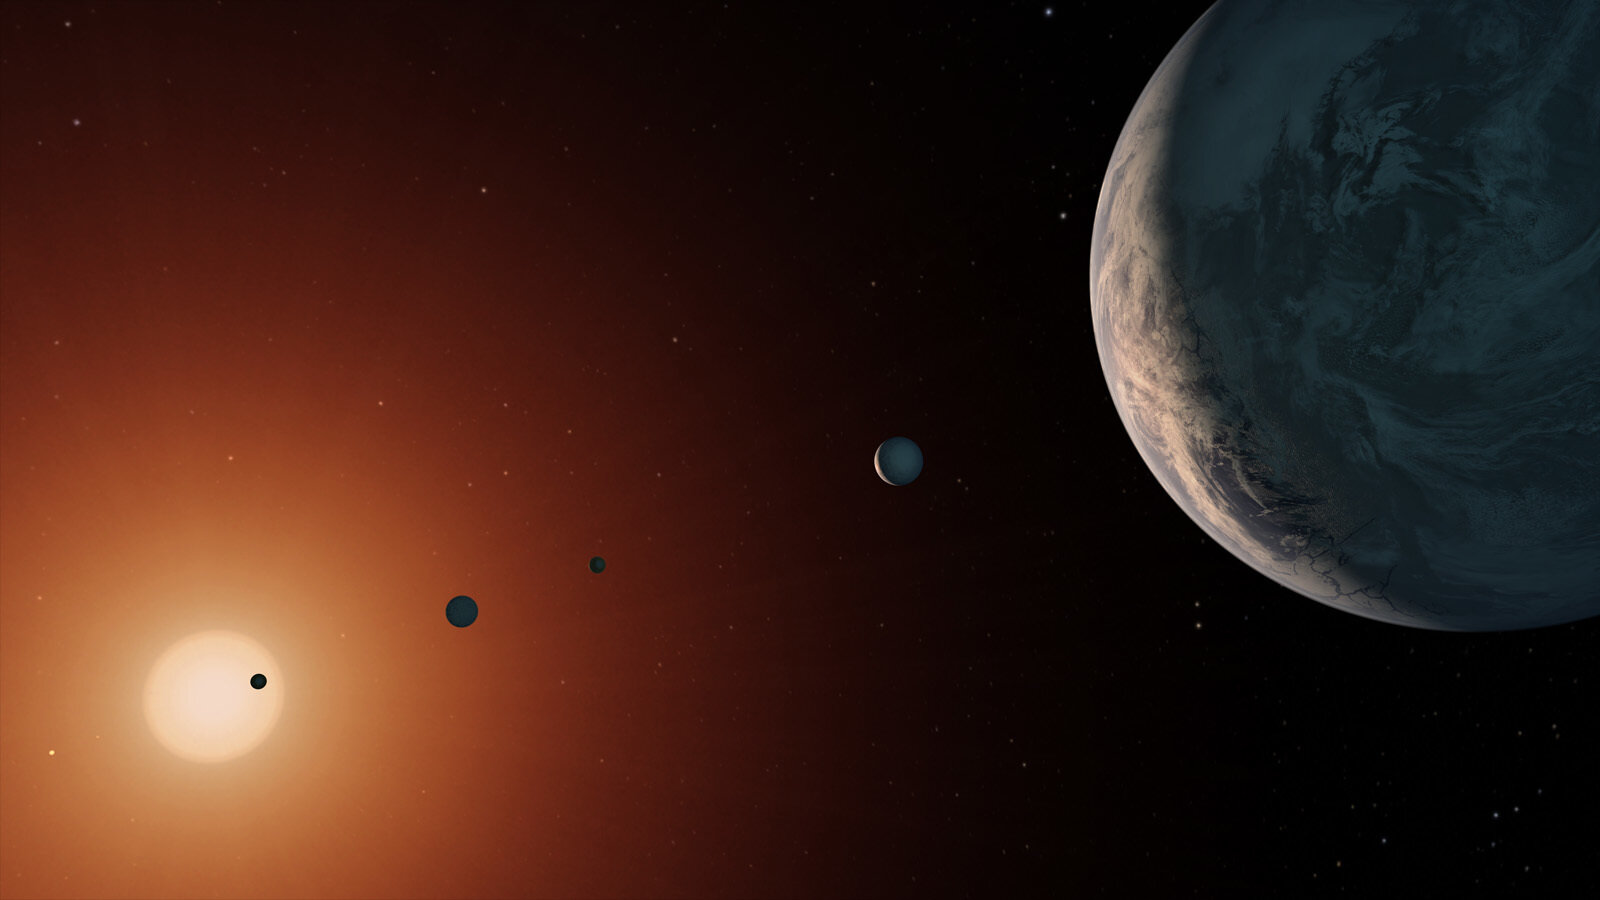 Orbital harmony limits late arrival of water on TRAPPIST-1 planets